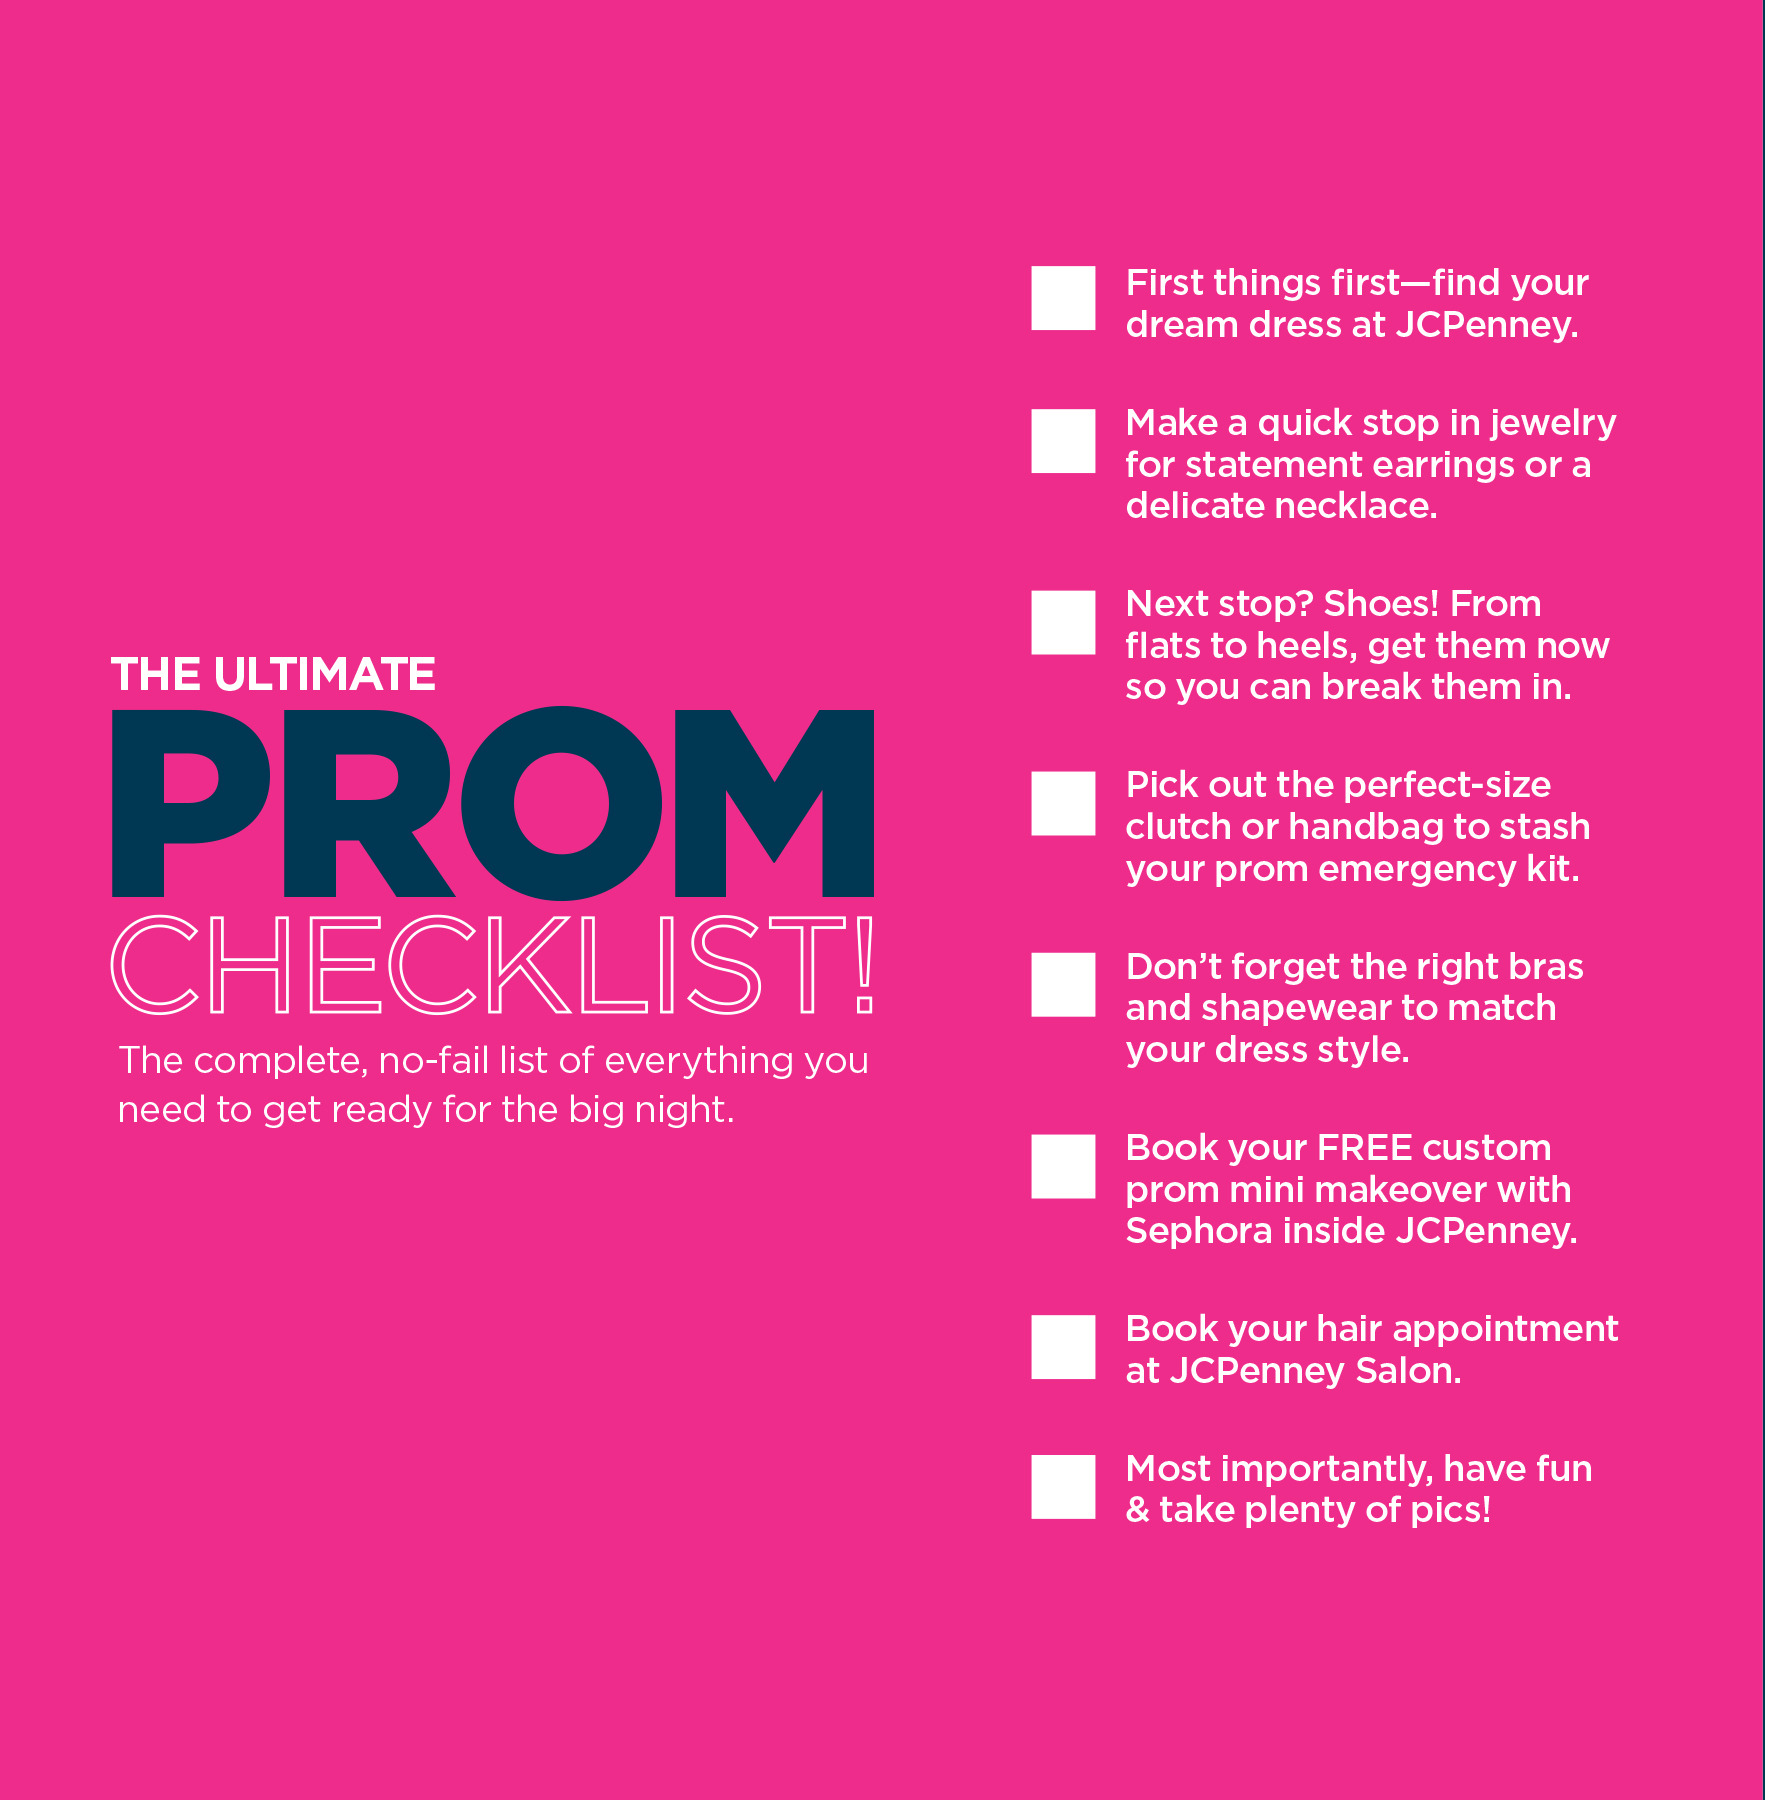 Teens invited to shop for prom necessities at the JCPenney “Get Prepped for  Prom” event - Penney IP LLC